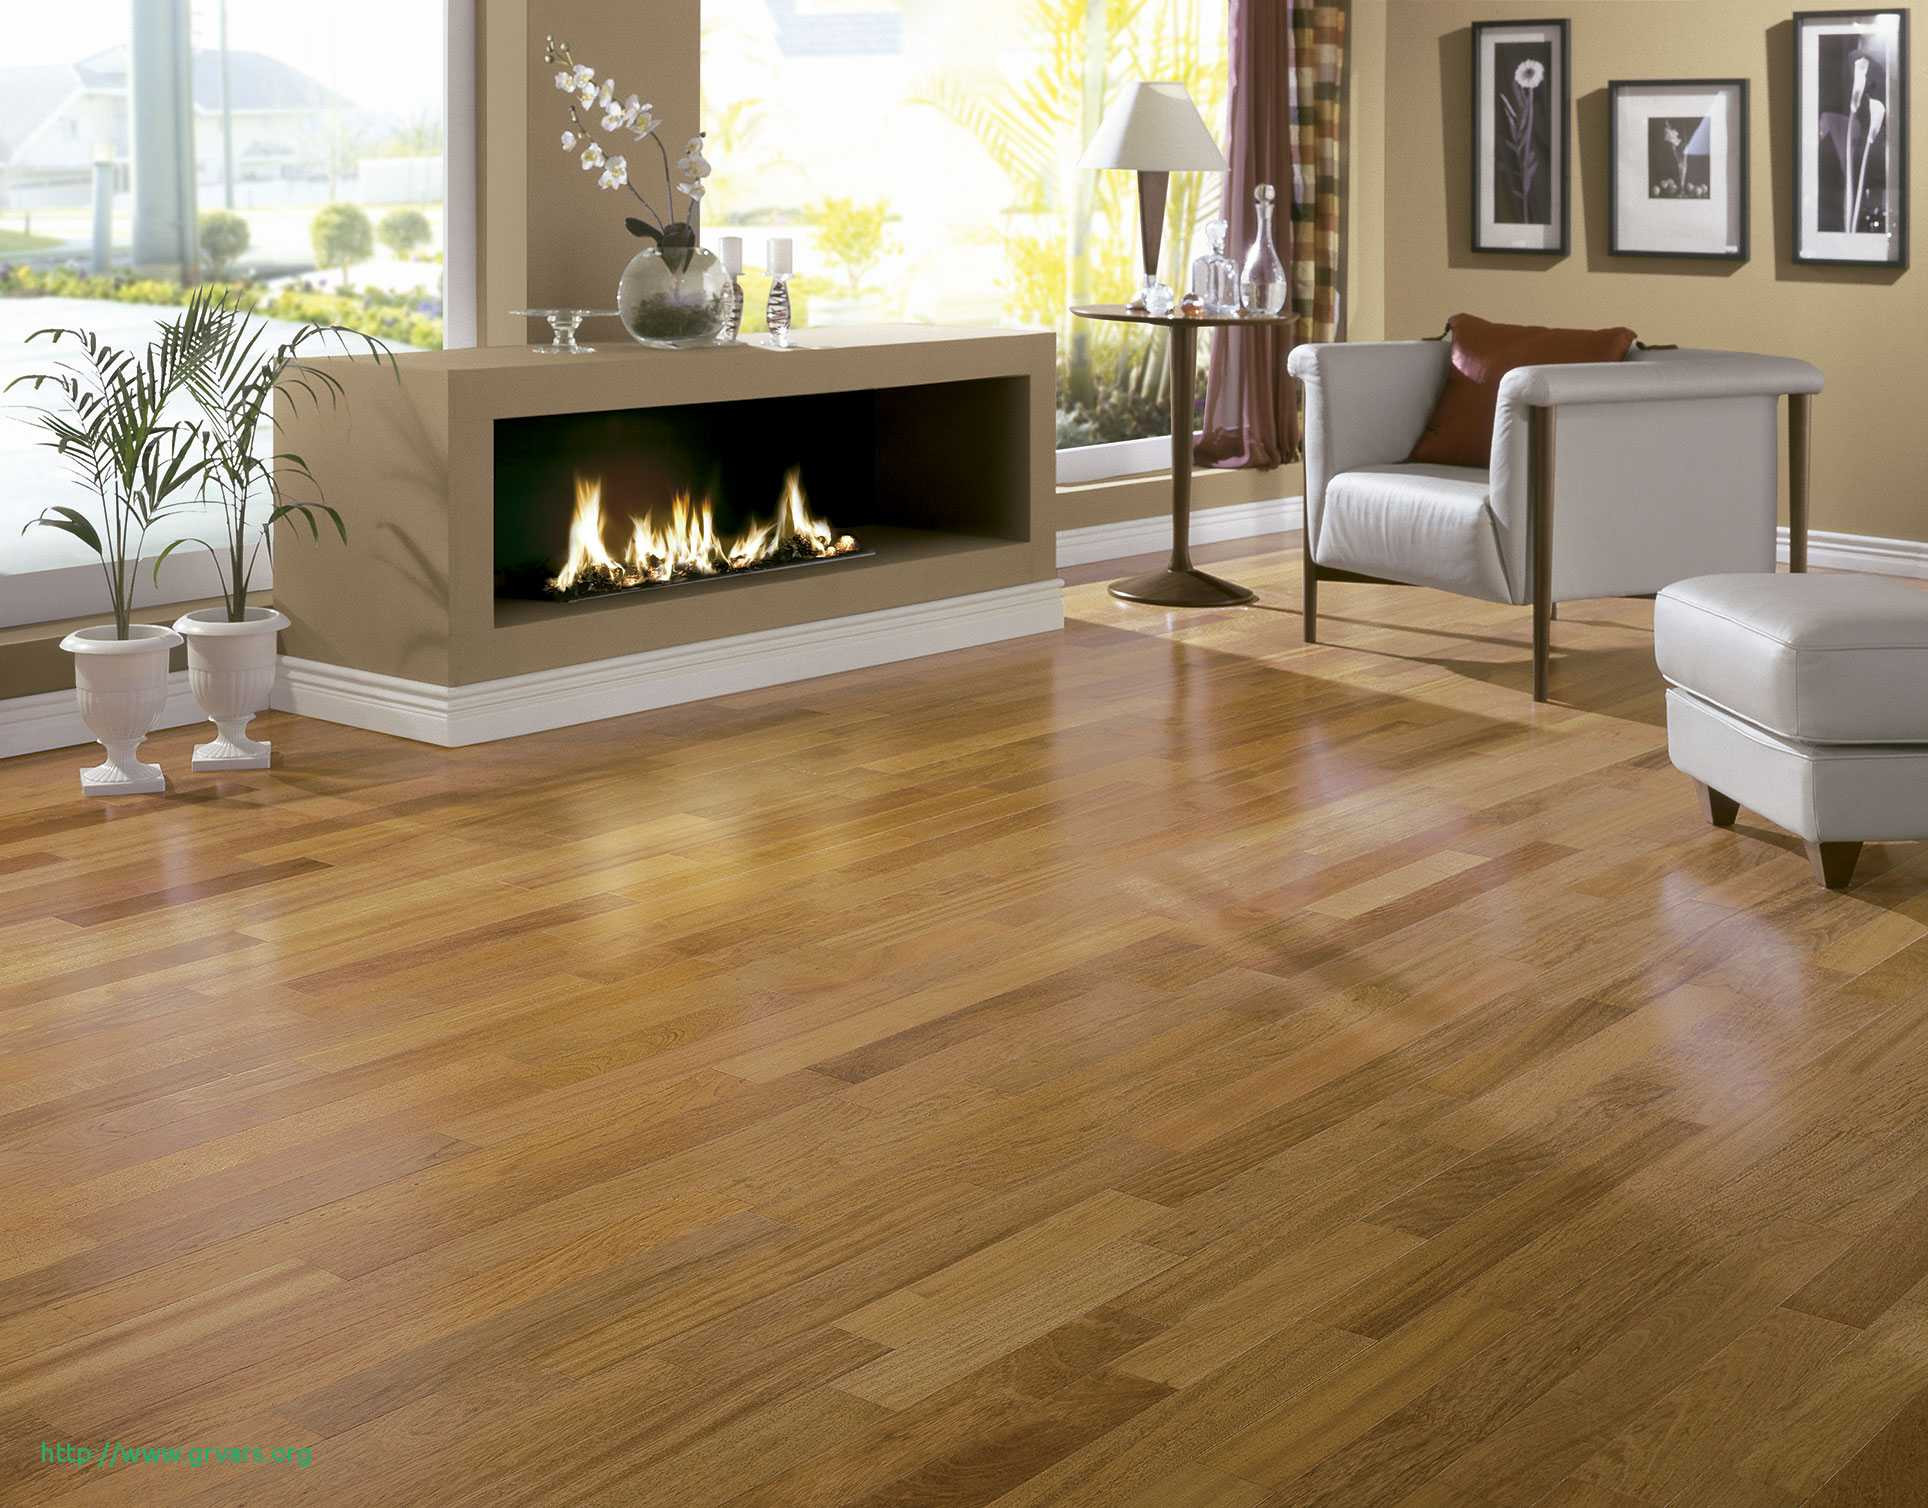 Fireplace Images Beautiful 26 Re Mended Hardwood Floor Fireplace Transition